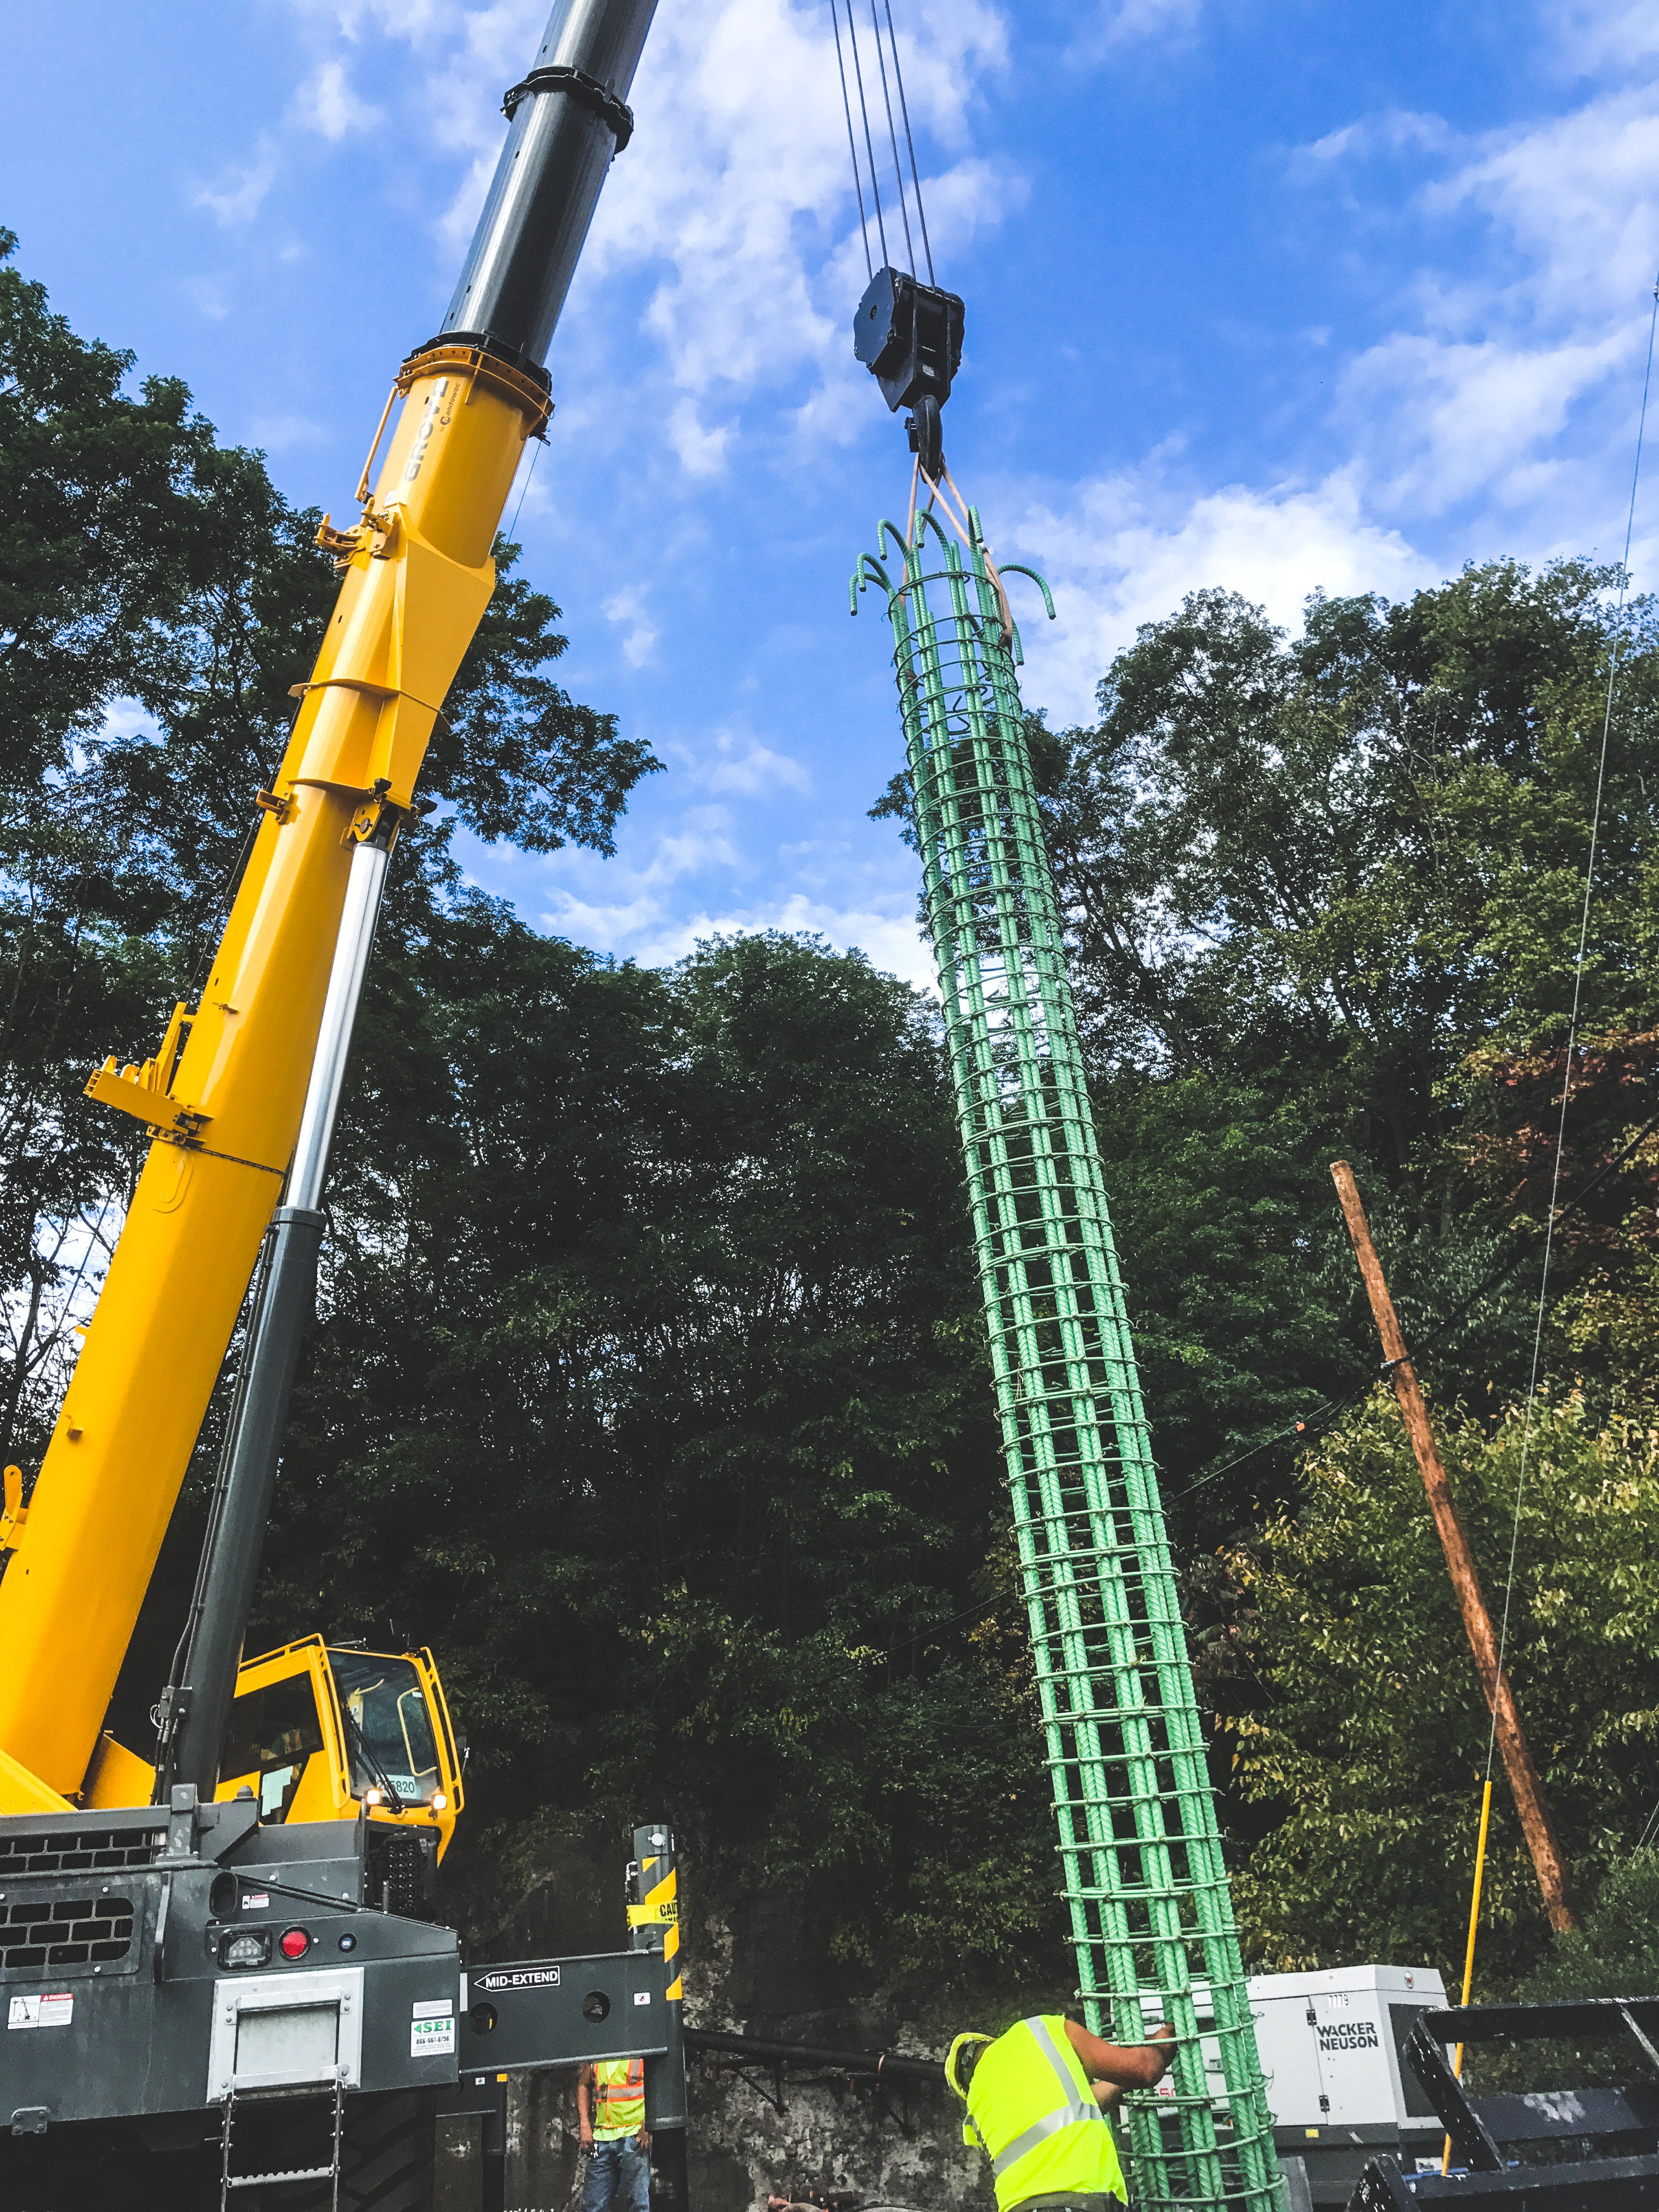 Kriger Construction (Kriger) has been using one of Manitowoc Cranes’ latest rough-terrain models, the Grove GRT8100, for more than six months in its bridge-building operations. The Scranton, Pennsylvania-based company has found the new, 100 USt crane to be a beneficial addition to its fleet, thanks to the competitive capacity, build quality and smooth operation that the GRT8100 offers.